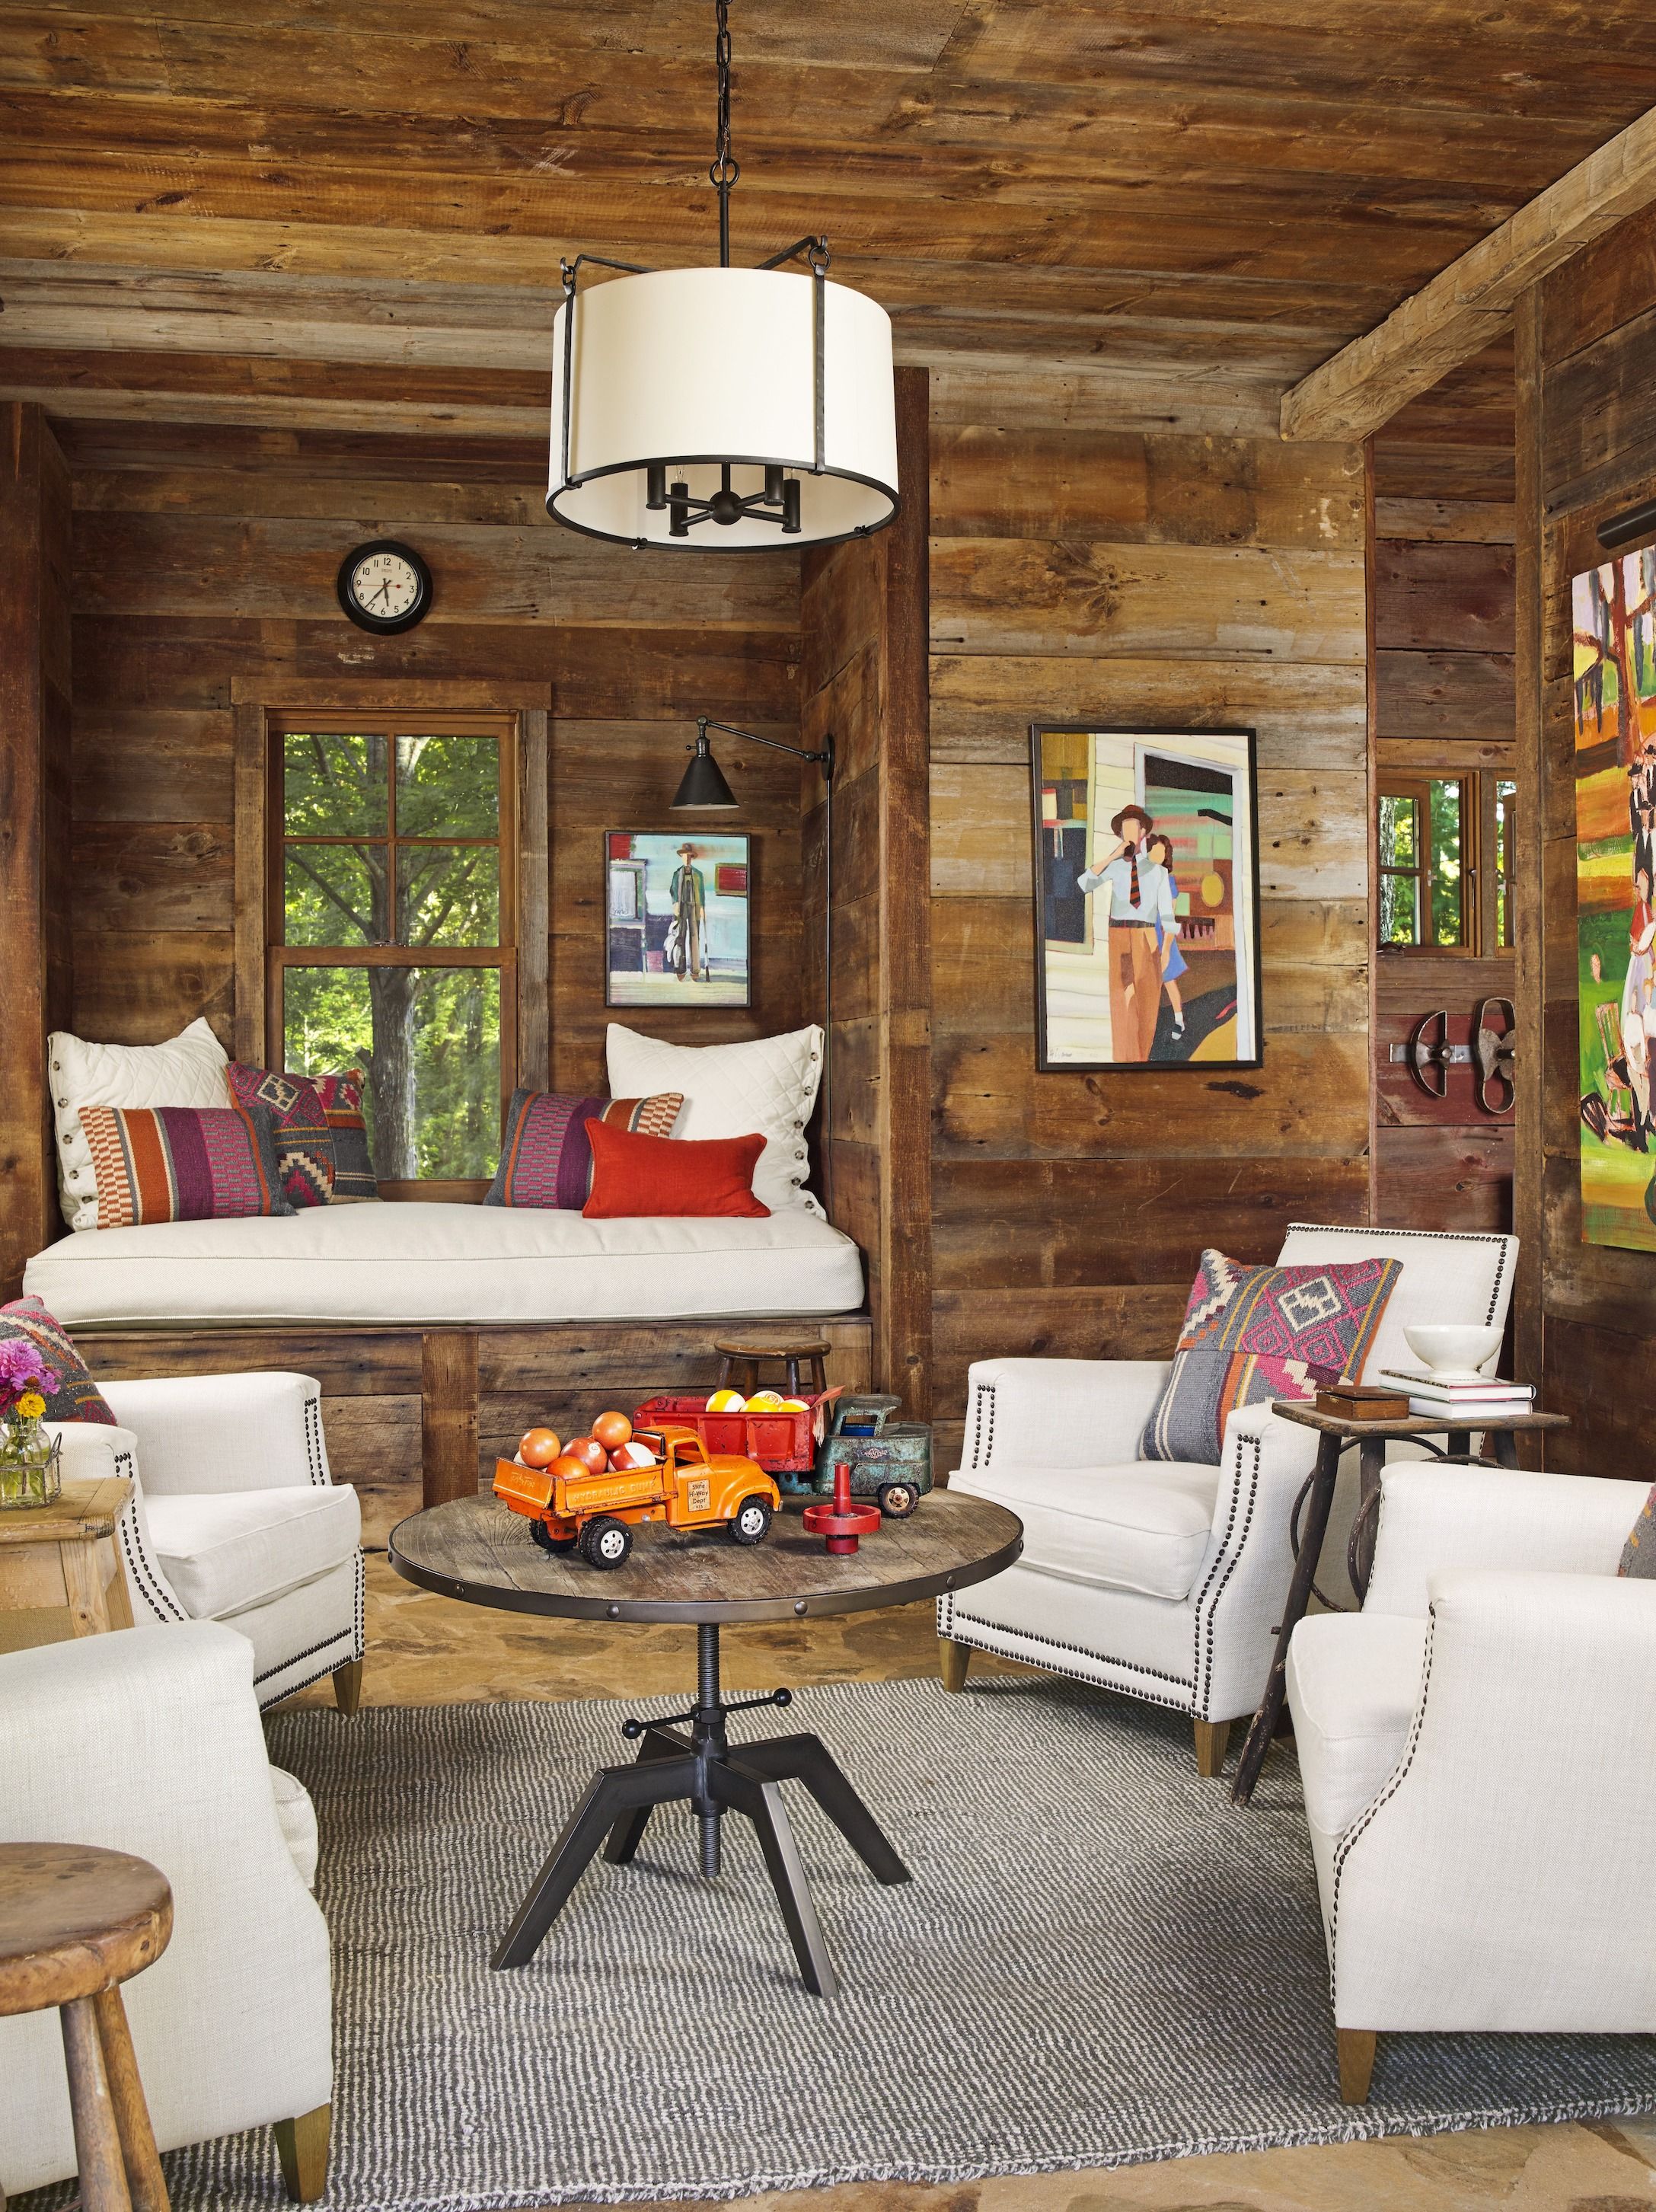 Modern Rustic Living Room Decor, Pics Of Rustic Country Living Rooms